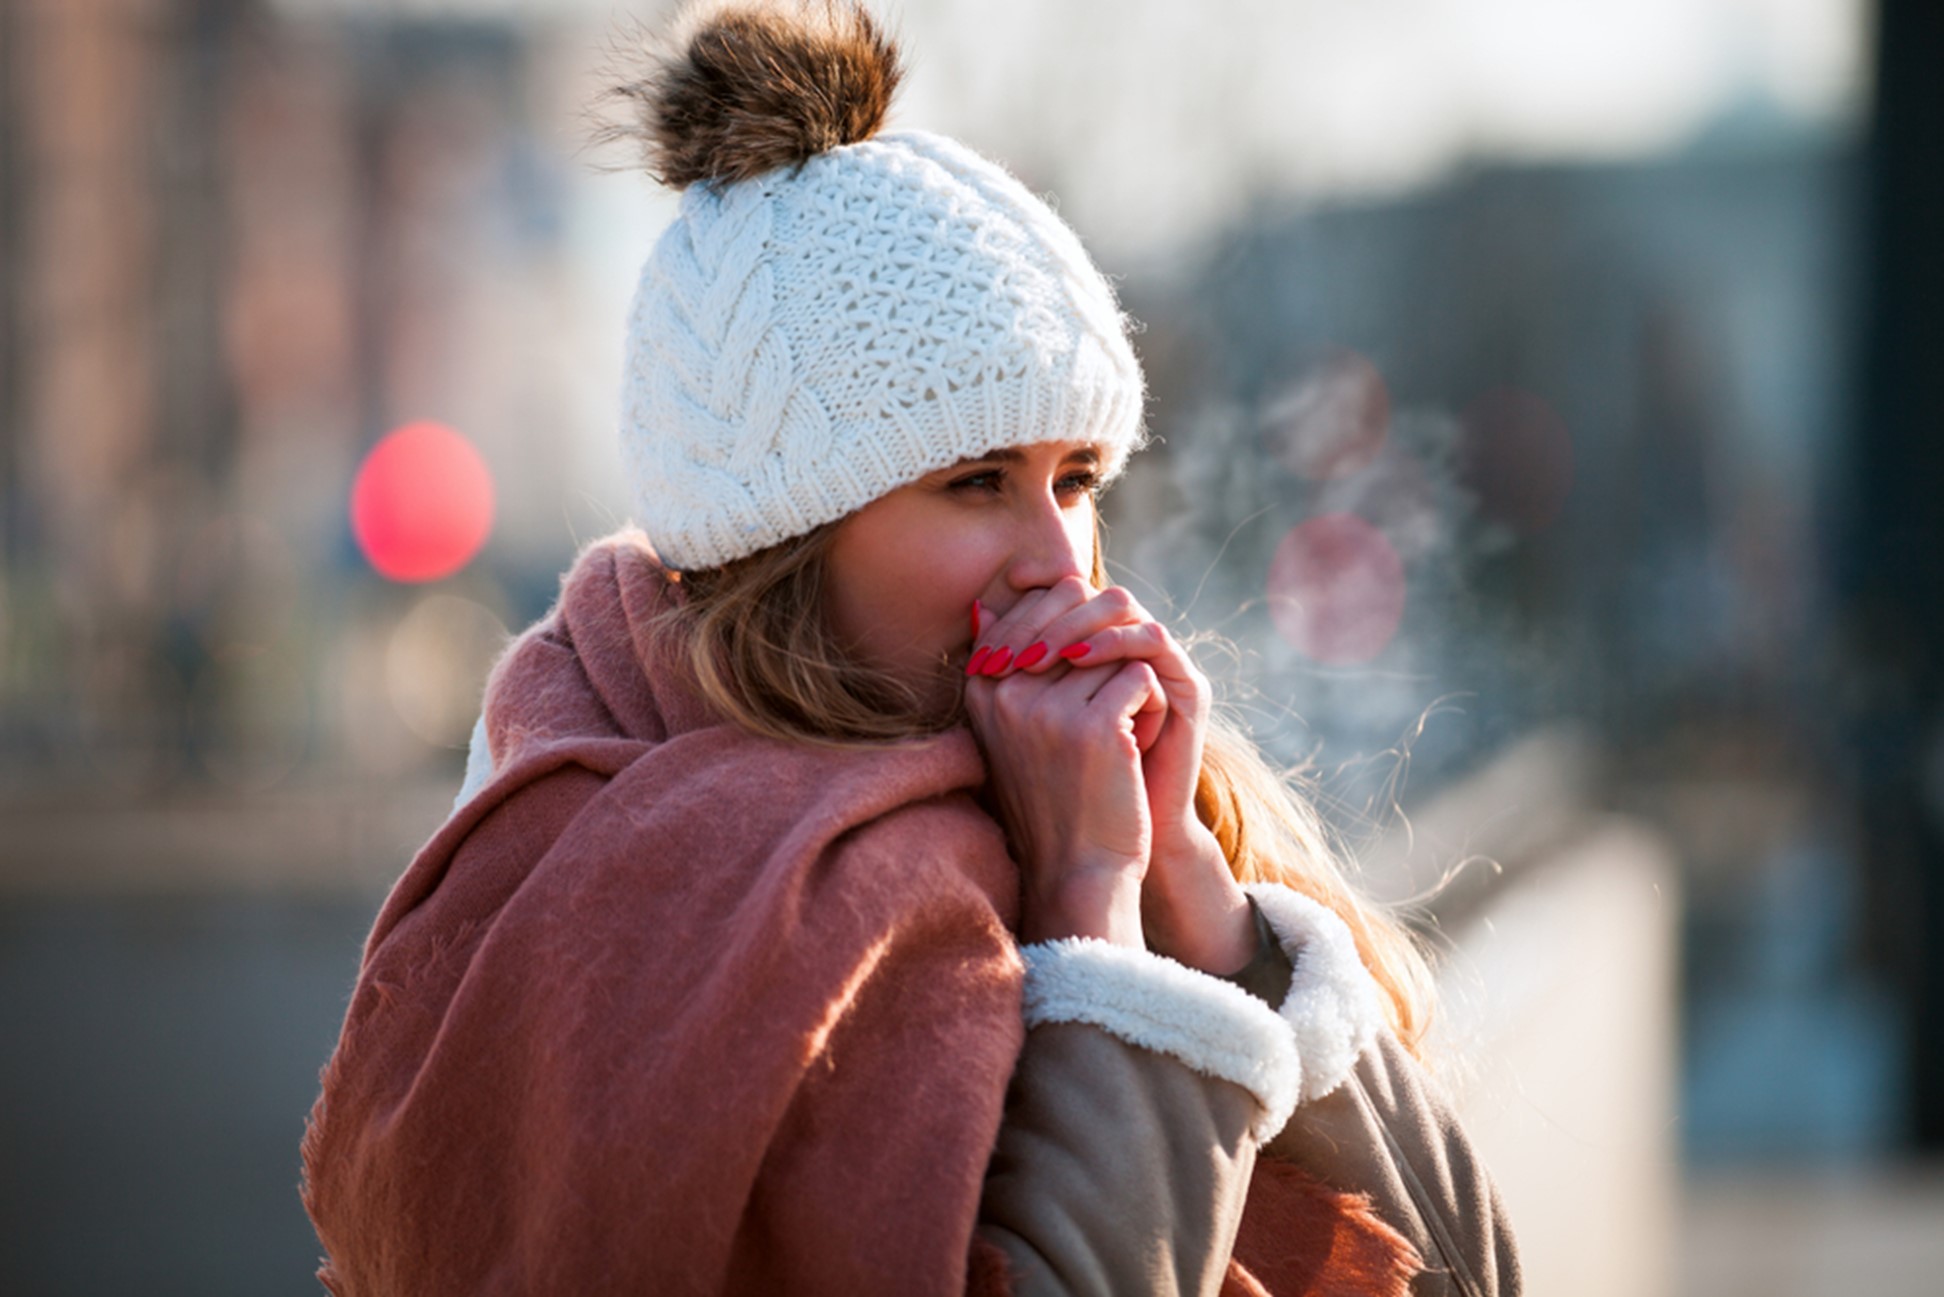 A woman in winter clothes standing outside blows into her hands to try and keep warm in the cold.